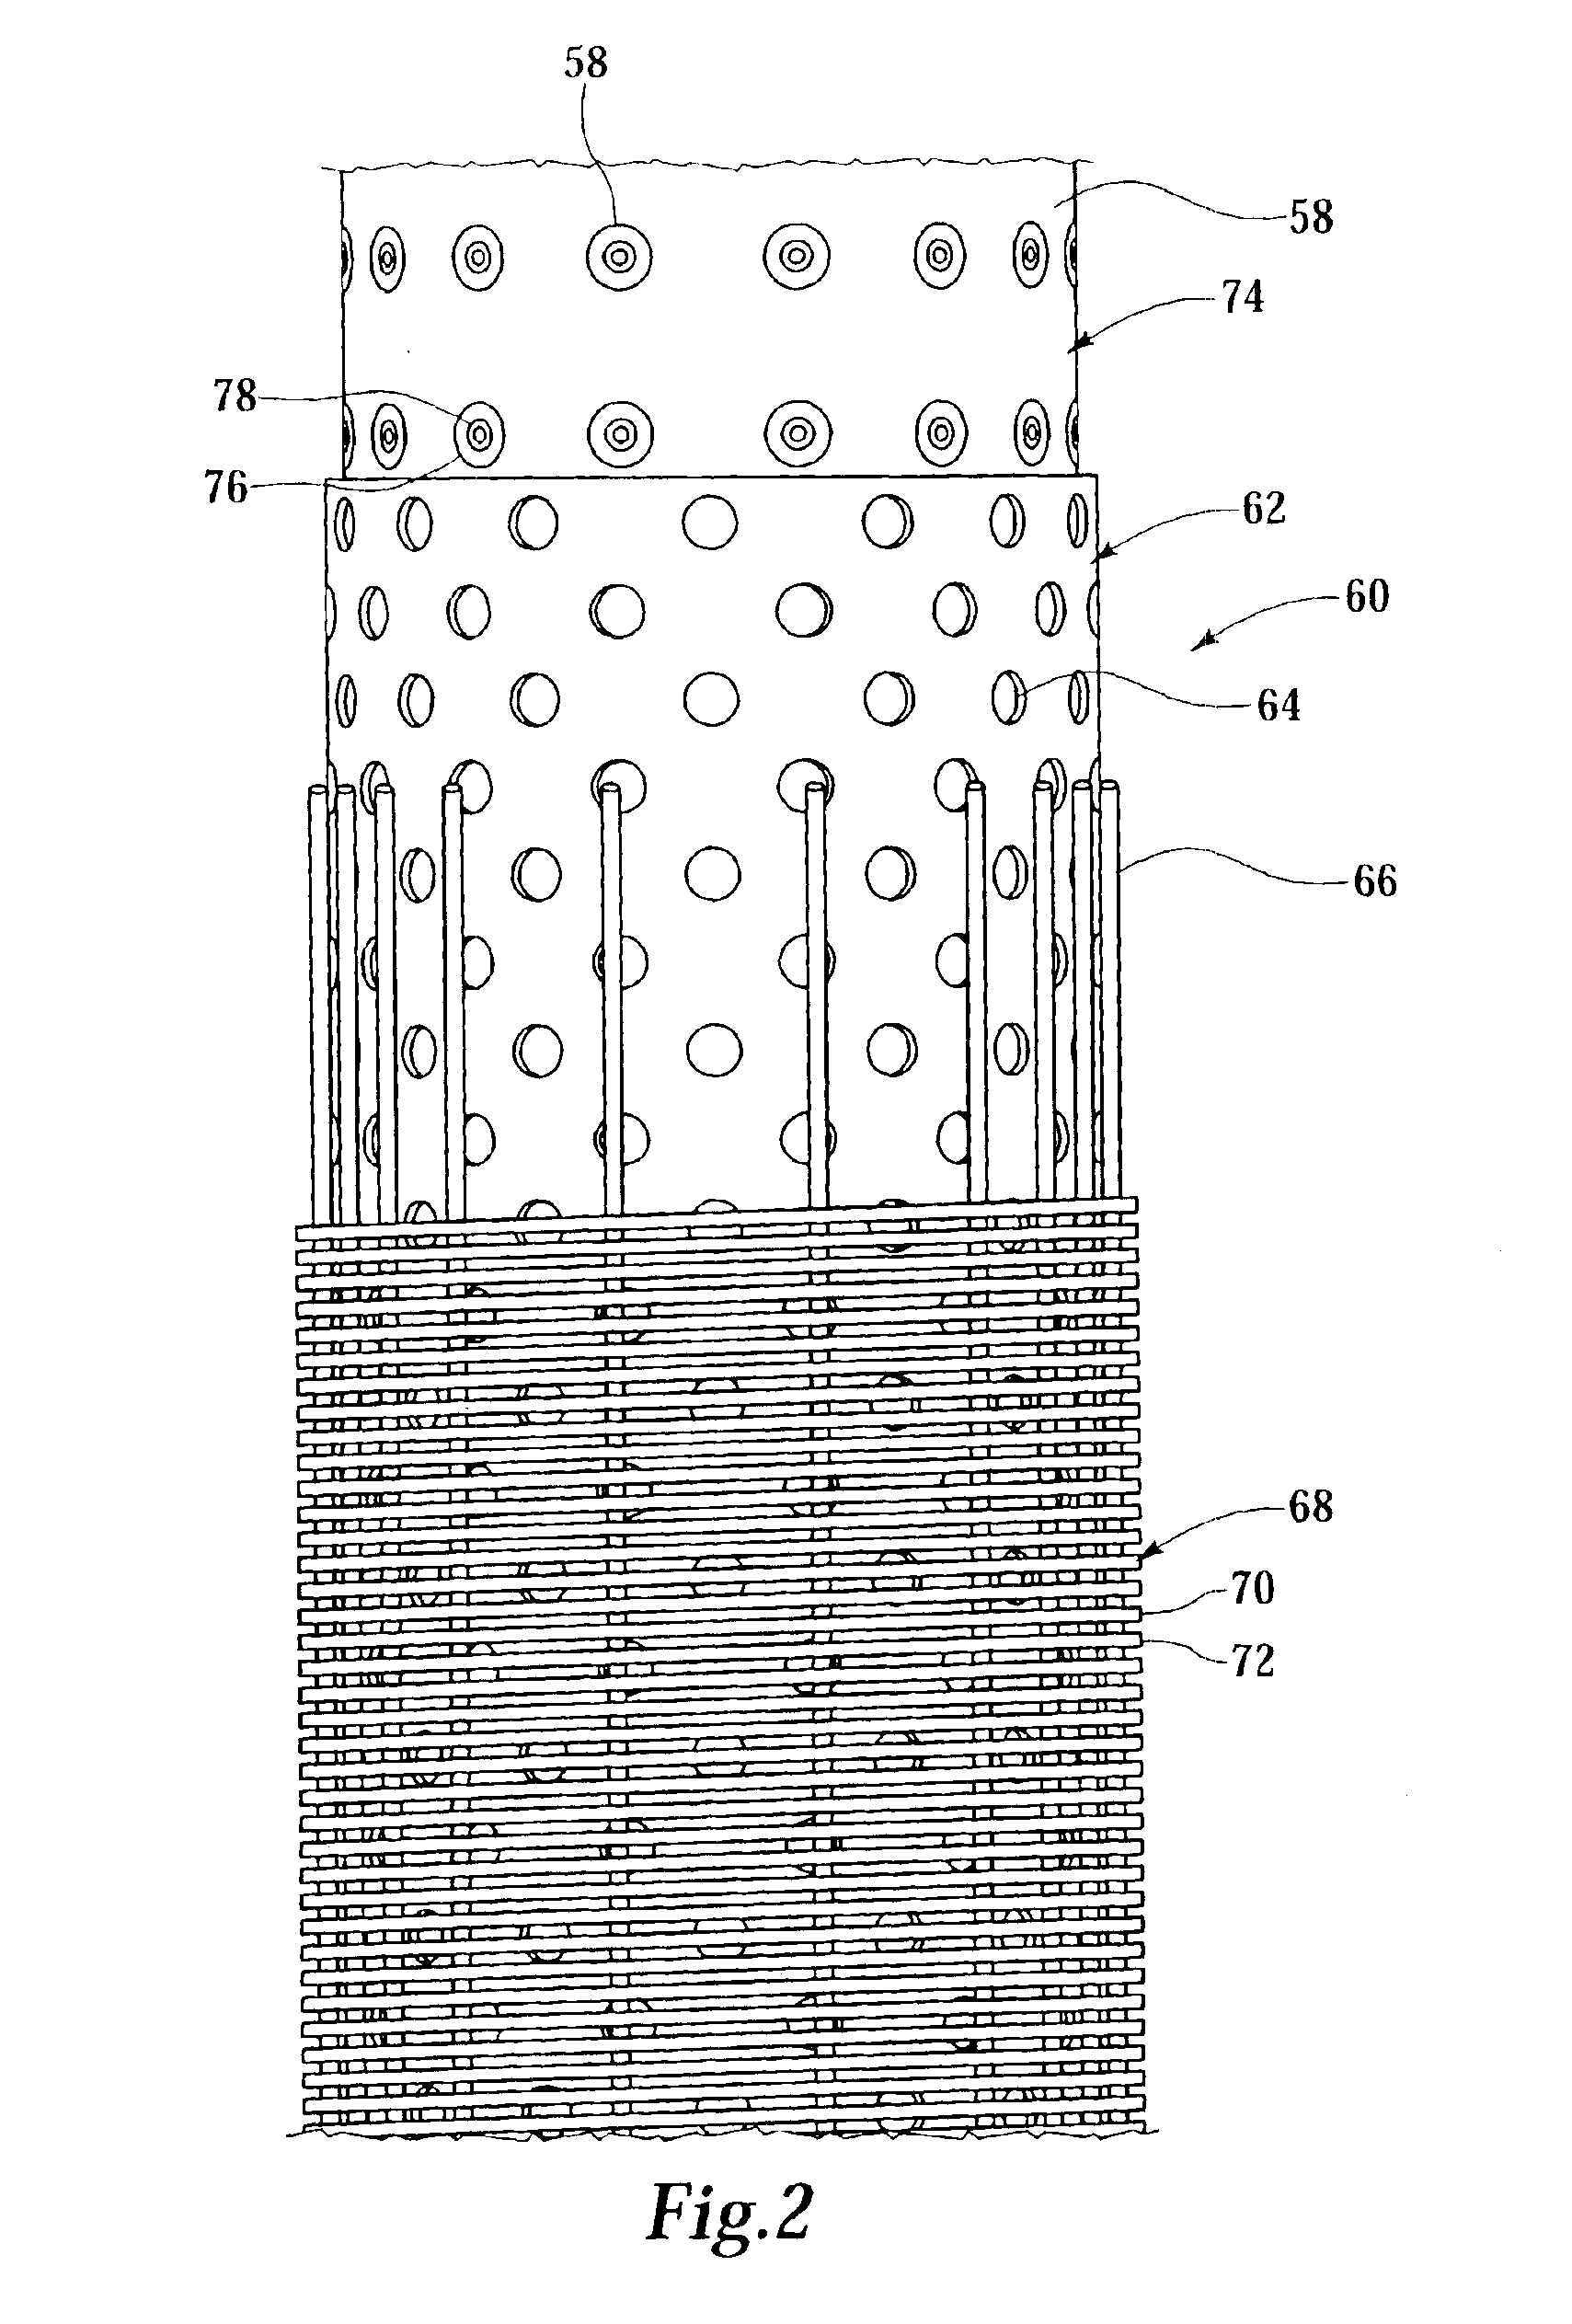 Sand control screen assembly having an internal isolation member and treatment method using the same